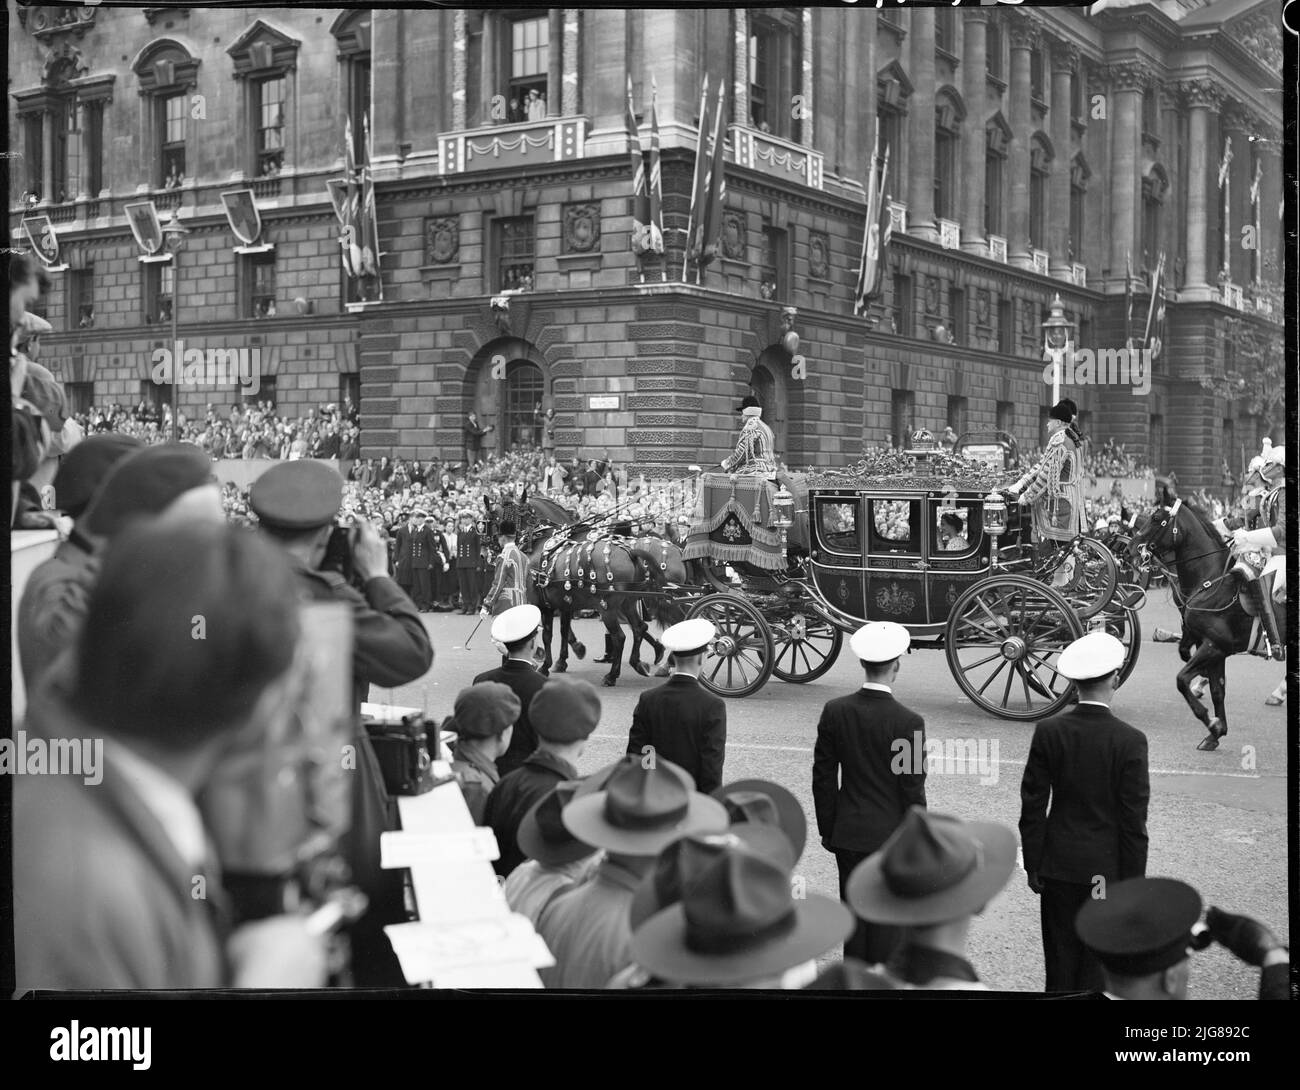 Coronation of Queen Elizabeth II, Parliament Square, City of Westminster, Greater London Authority, 02-06-1953. A view in Parliament Square showing crowds watching as the coach carrying Princess Margaret and the Queen Mother passes during the coronation procession of Queen Elizabeth II. Stock Photo